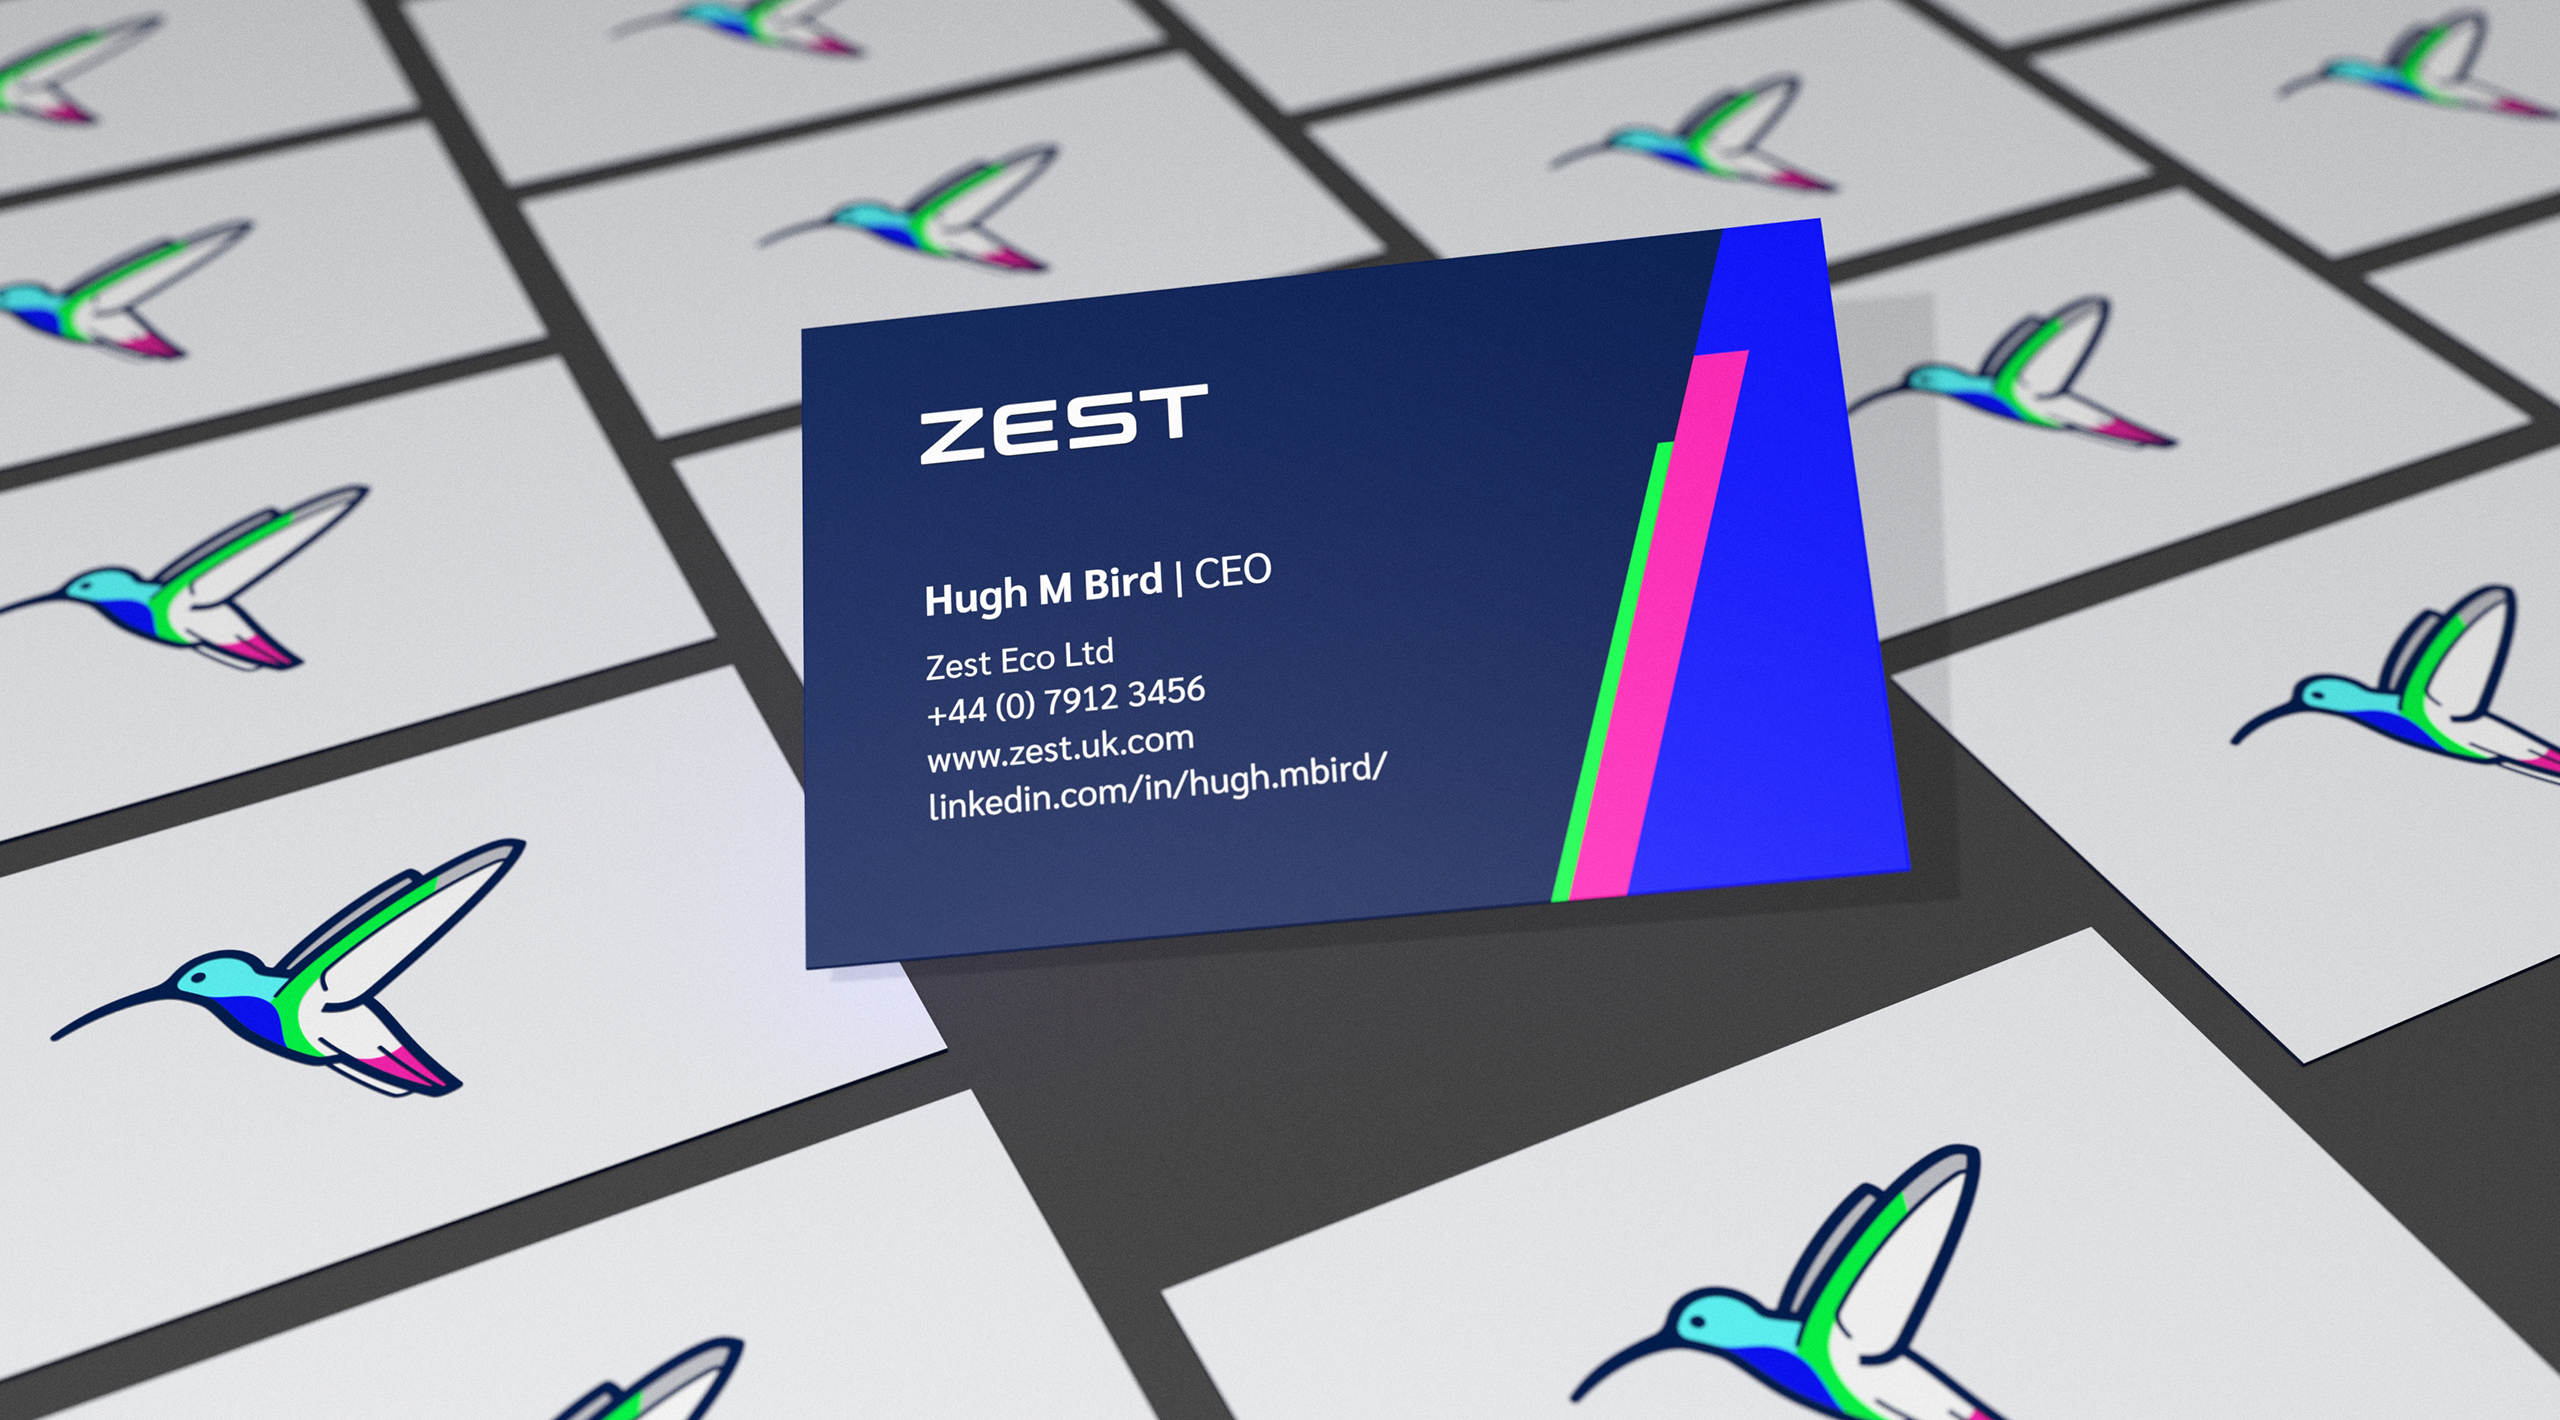 The business card harnesses the impact of the bold colour palette.